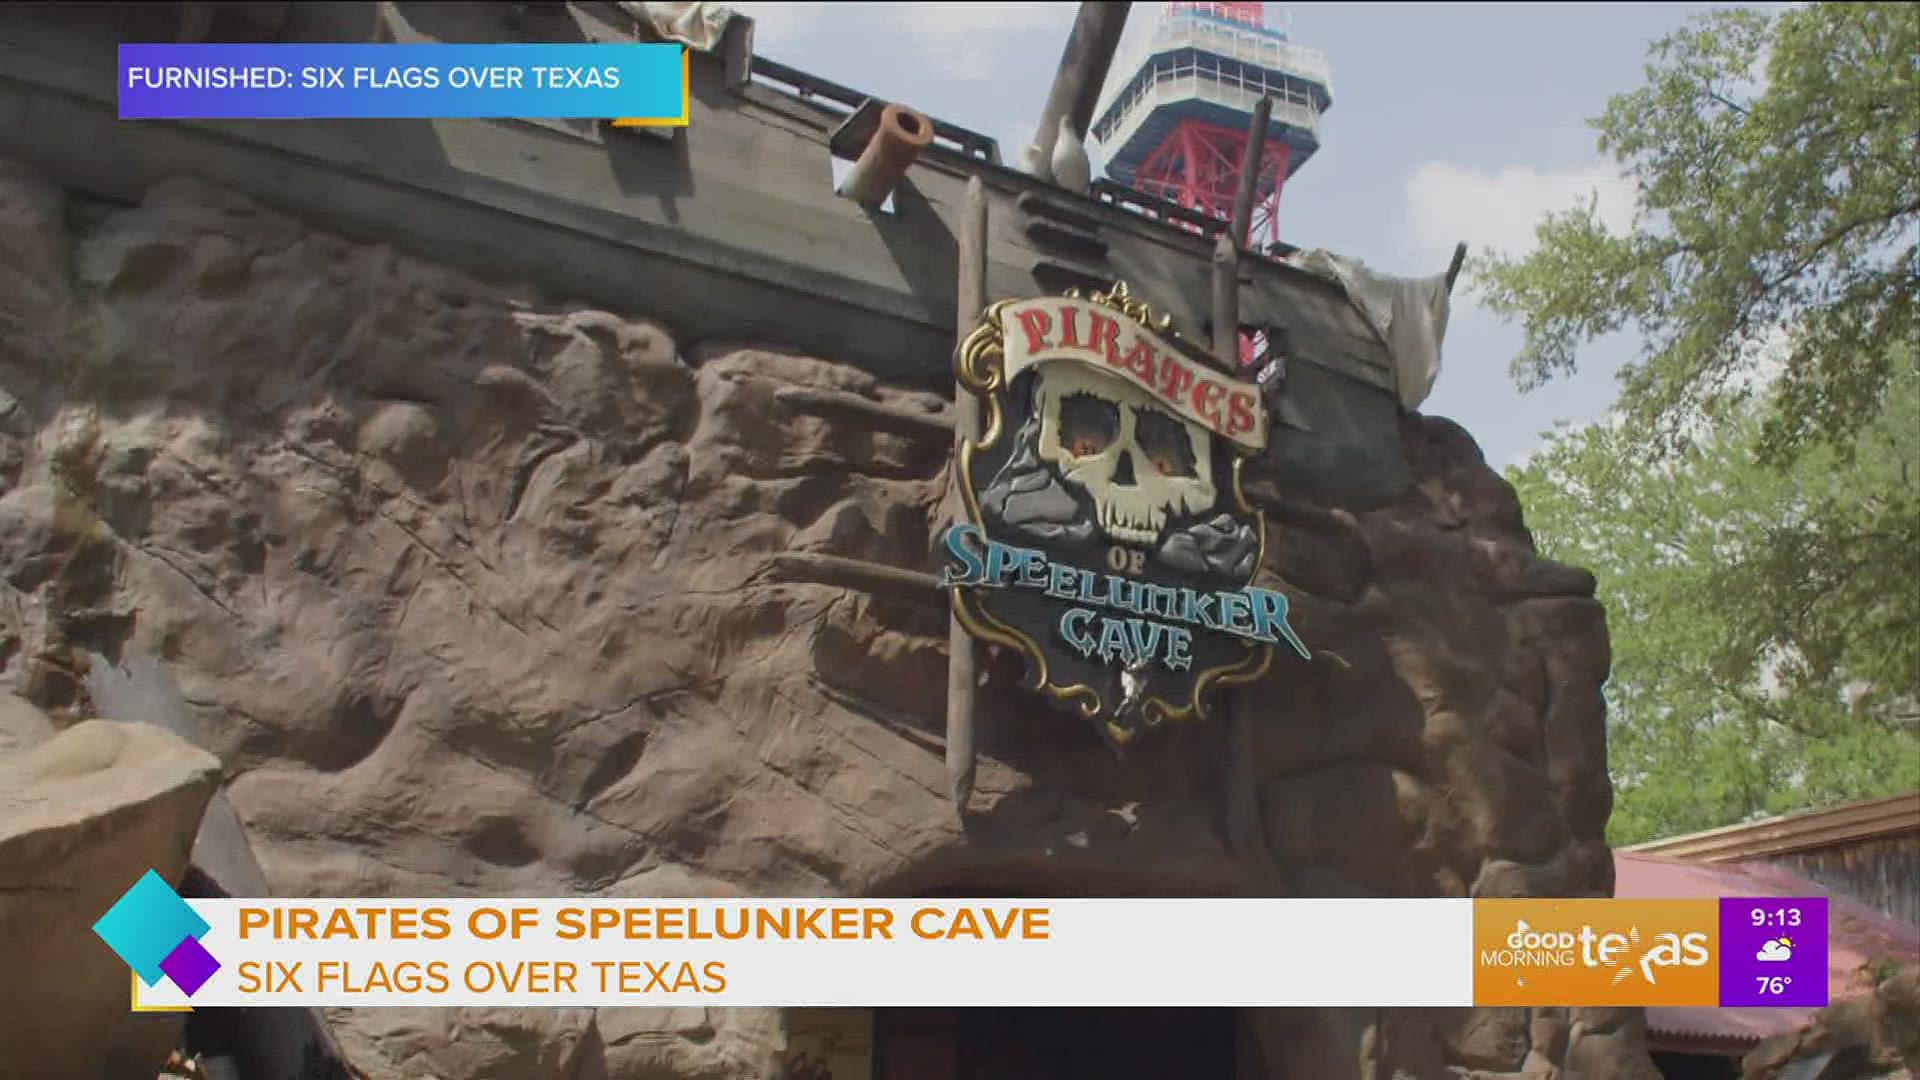 ‘Pirates of Speelunker Cave’ is an all-new ride experience at Six Flags over Texas.